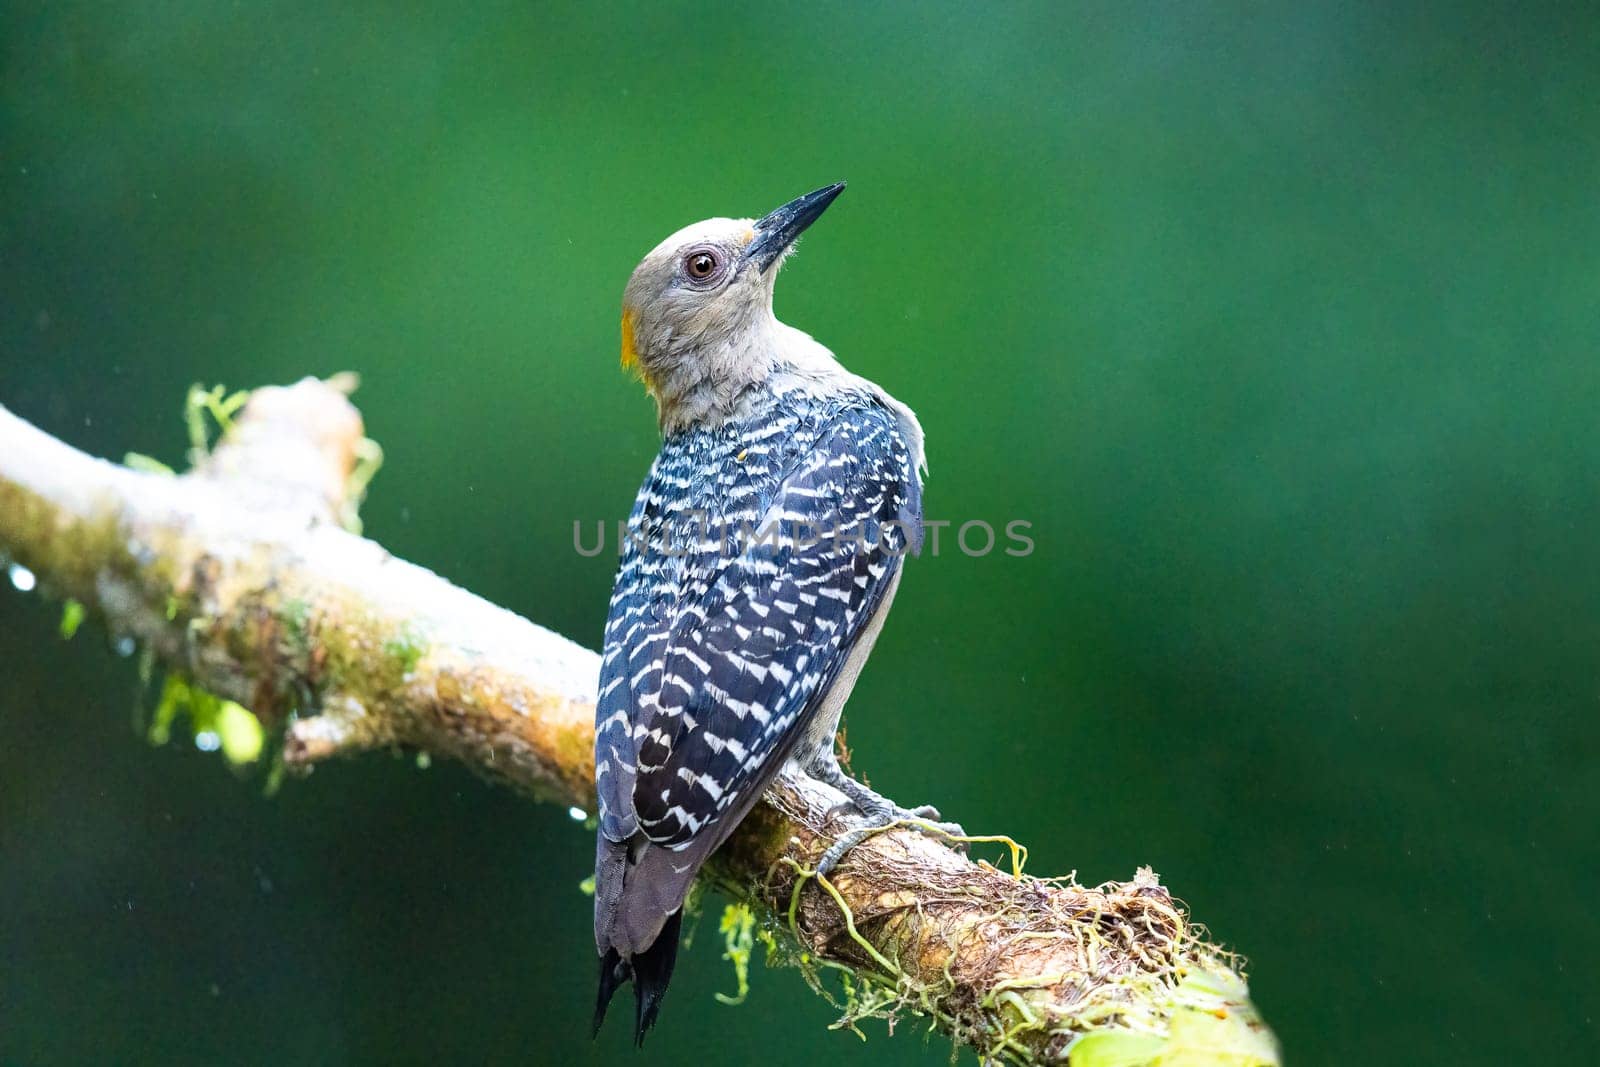 Hoffman's woodpecker perched on a tree branch in Costa Rica